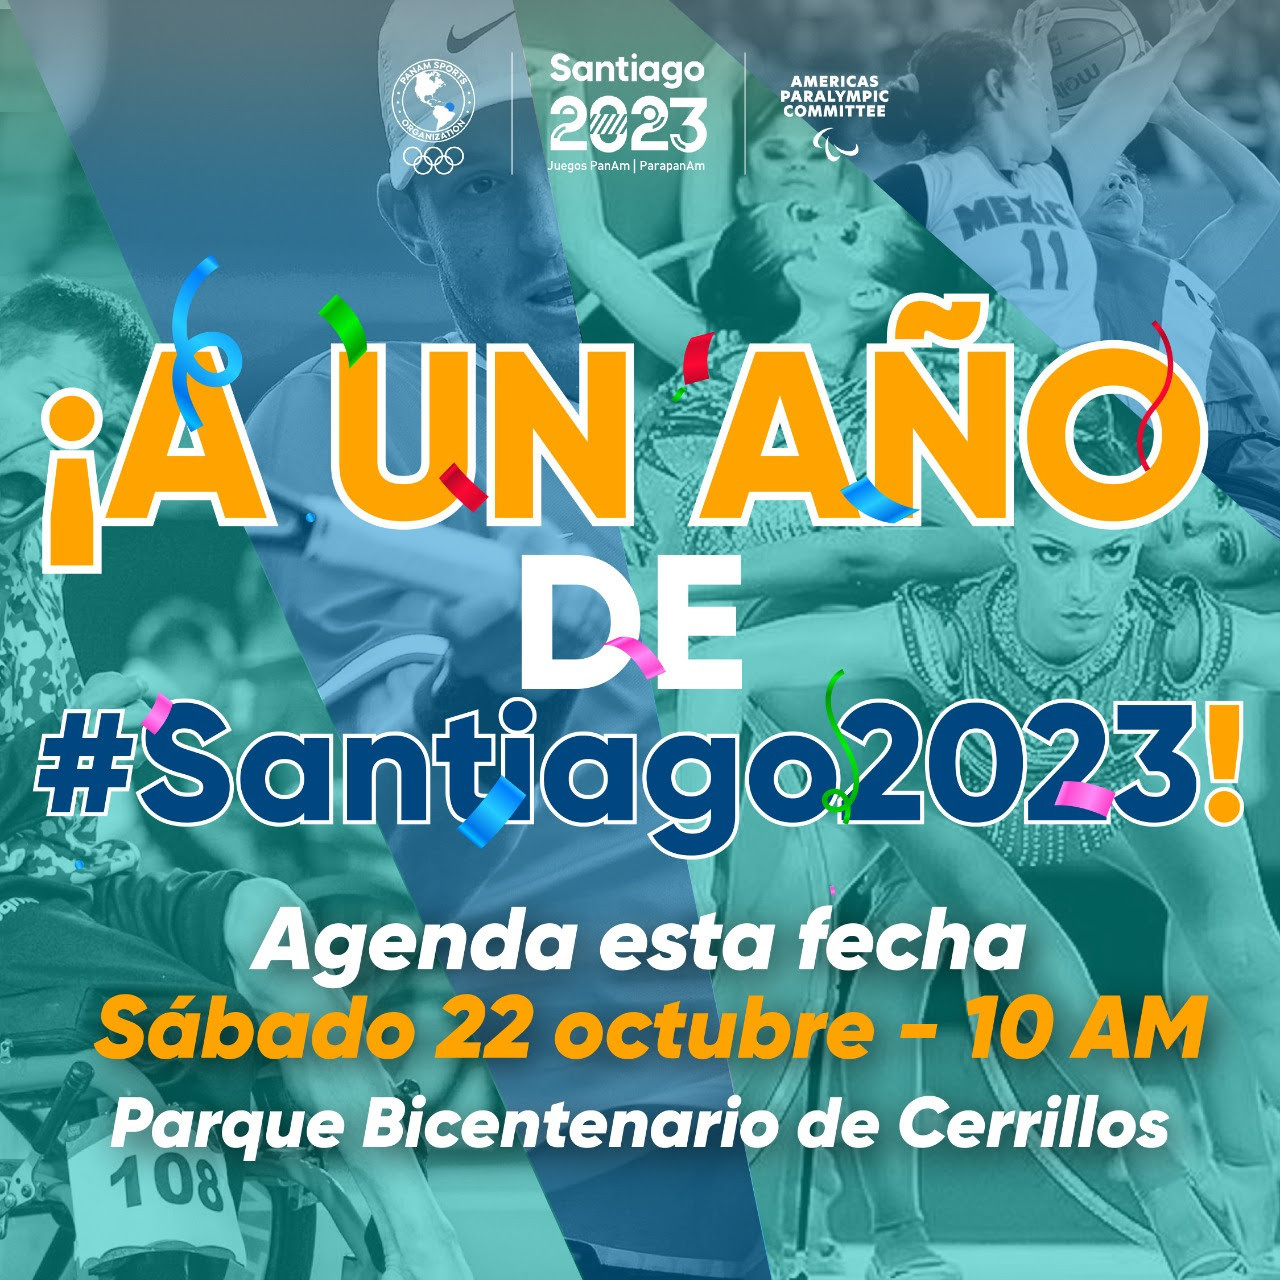 Community-based programmes and artistic shows have been planned as Santiago 2023 marks one year to go until the Pan American Games ©Santiago 2023